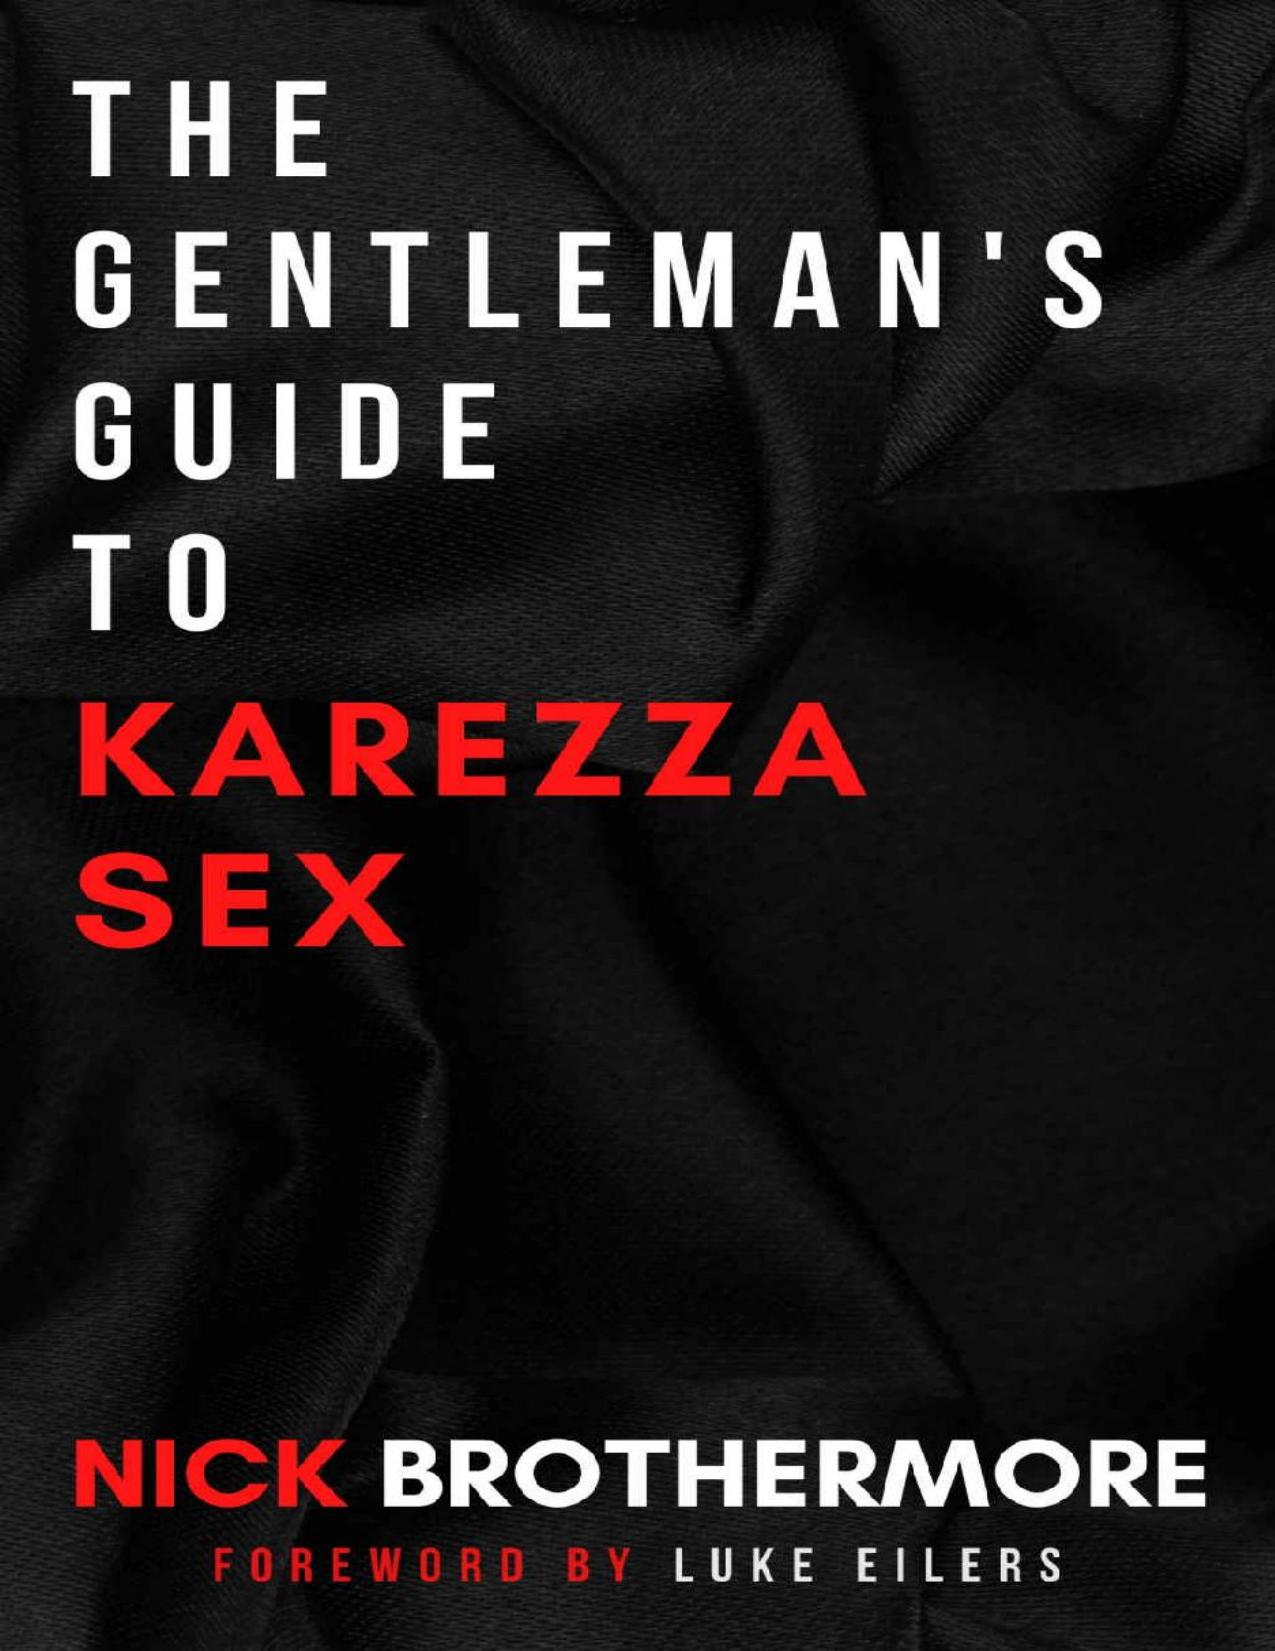 The Gentleman's Guide To Karezza Sex: Semen Retention In Bed To Supercharge Your Life by Nick Brothermore